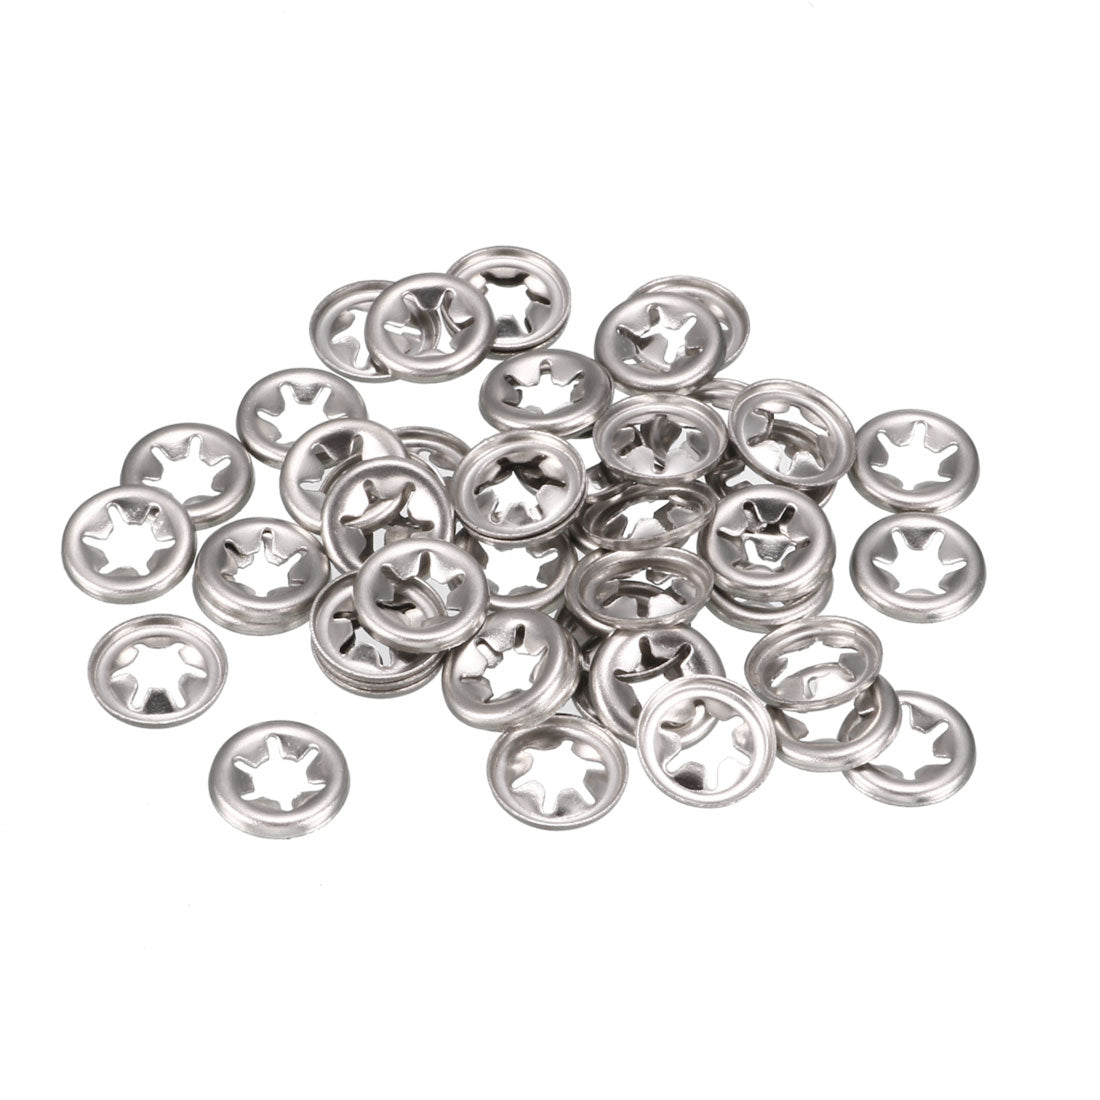 uxcell Uxcell M5 Internal Tooth Star Locking Washer 4.6mm I.D. 12mm O.D. Lock Washers Push On Locking Speed Clip, 304 Stainless Steel 50pcs